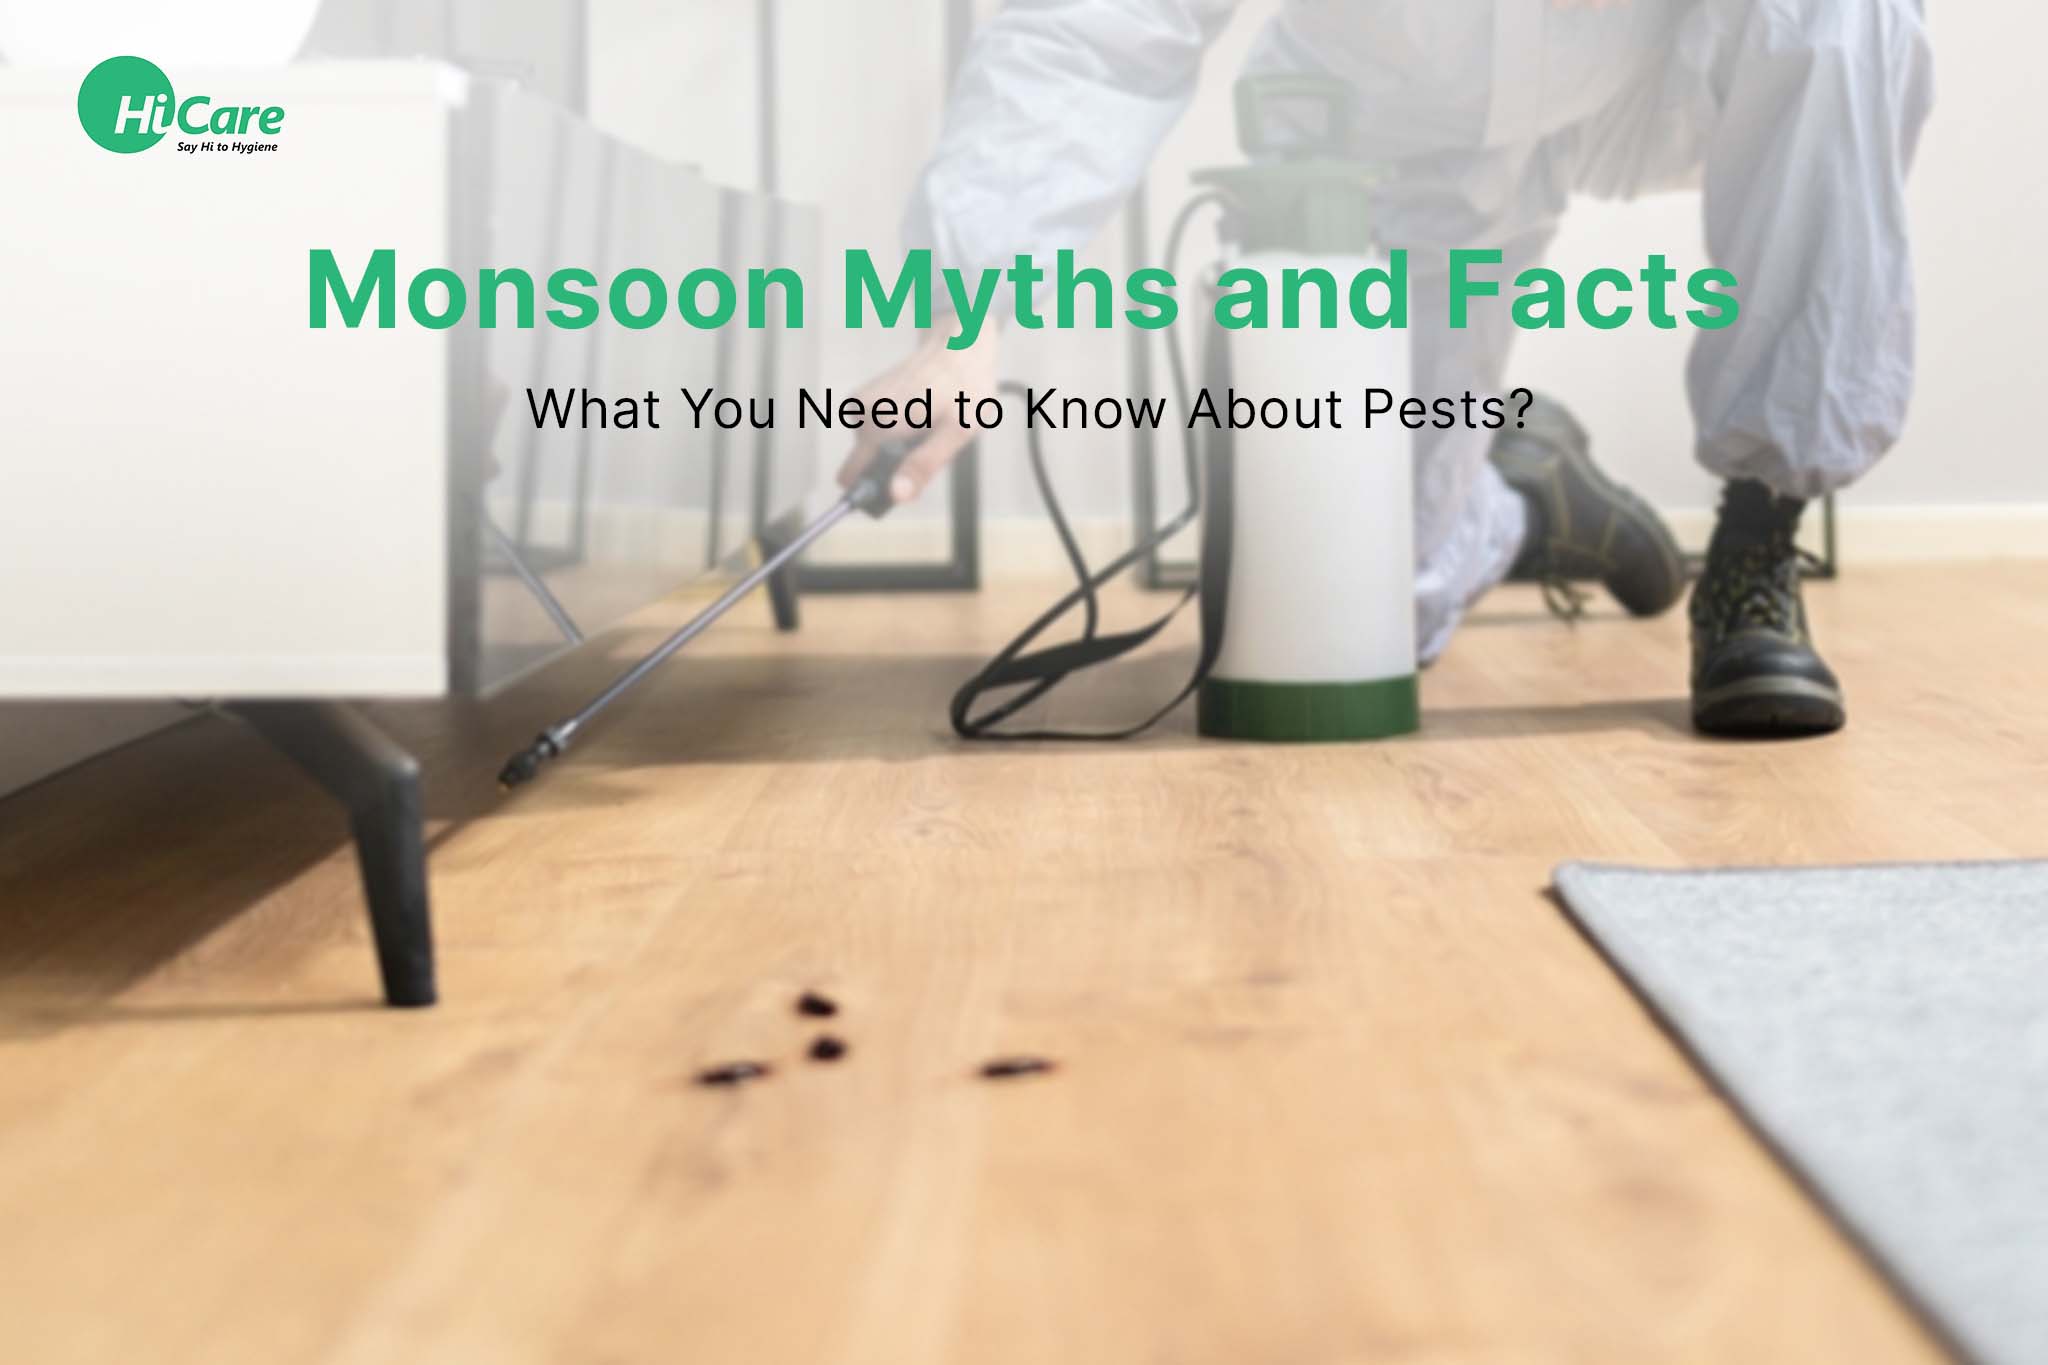 Monsoon Myths and Facts: What You Need to Know About Pests?